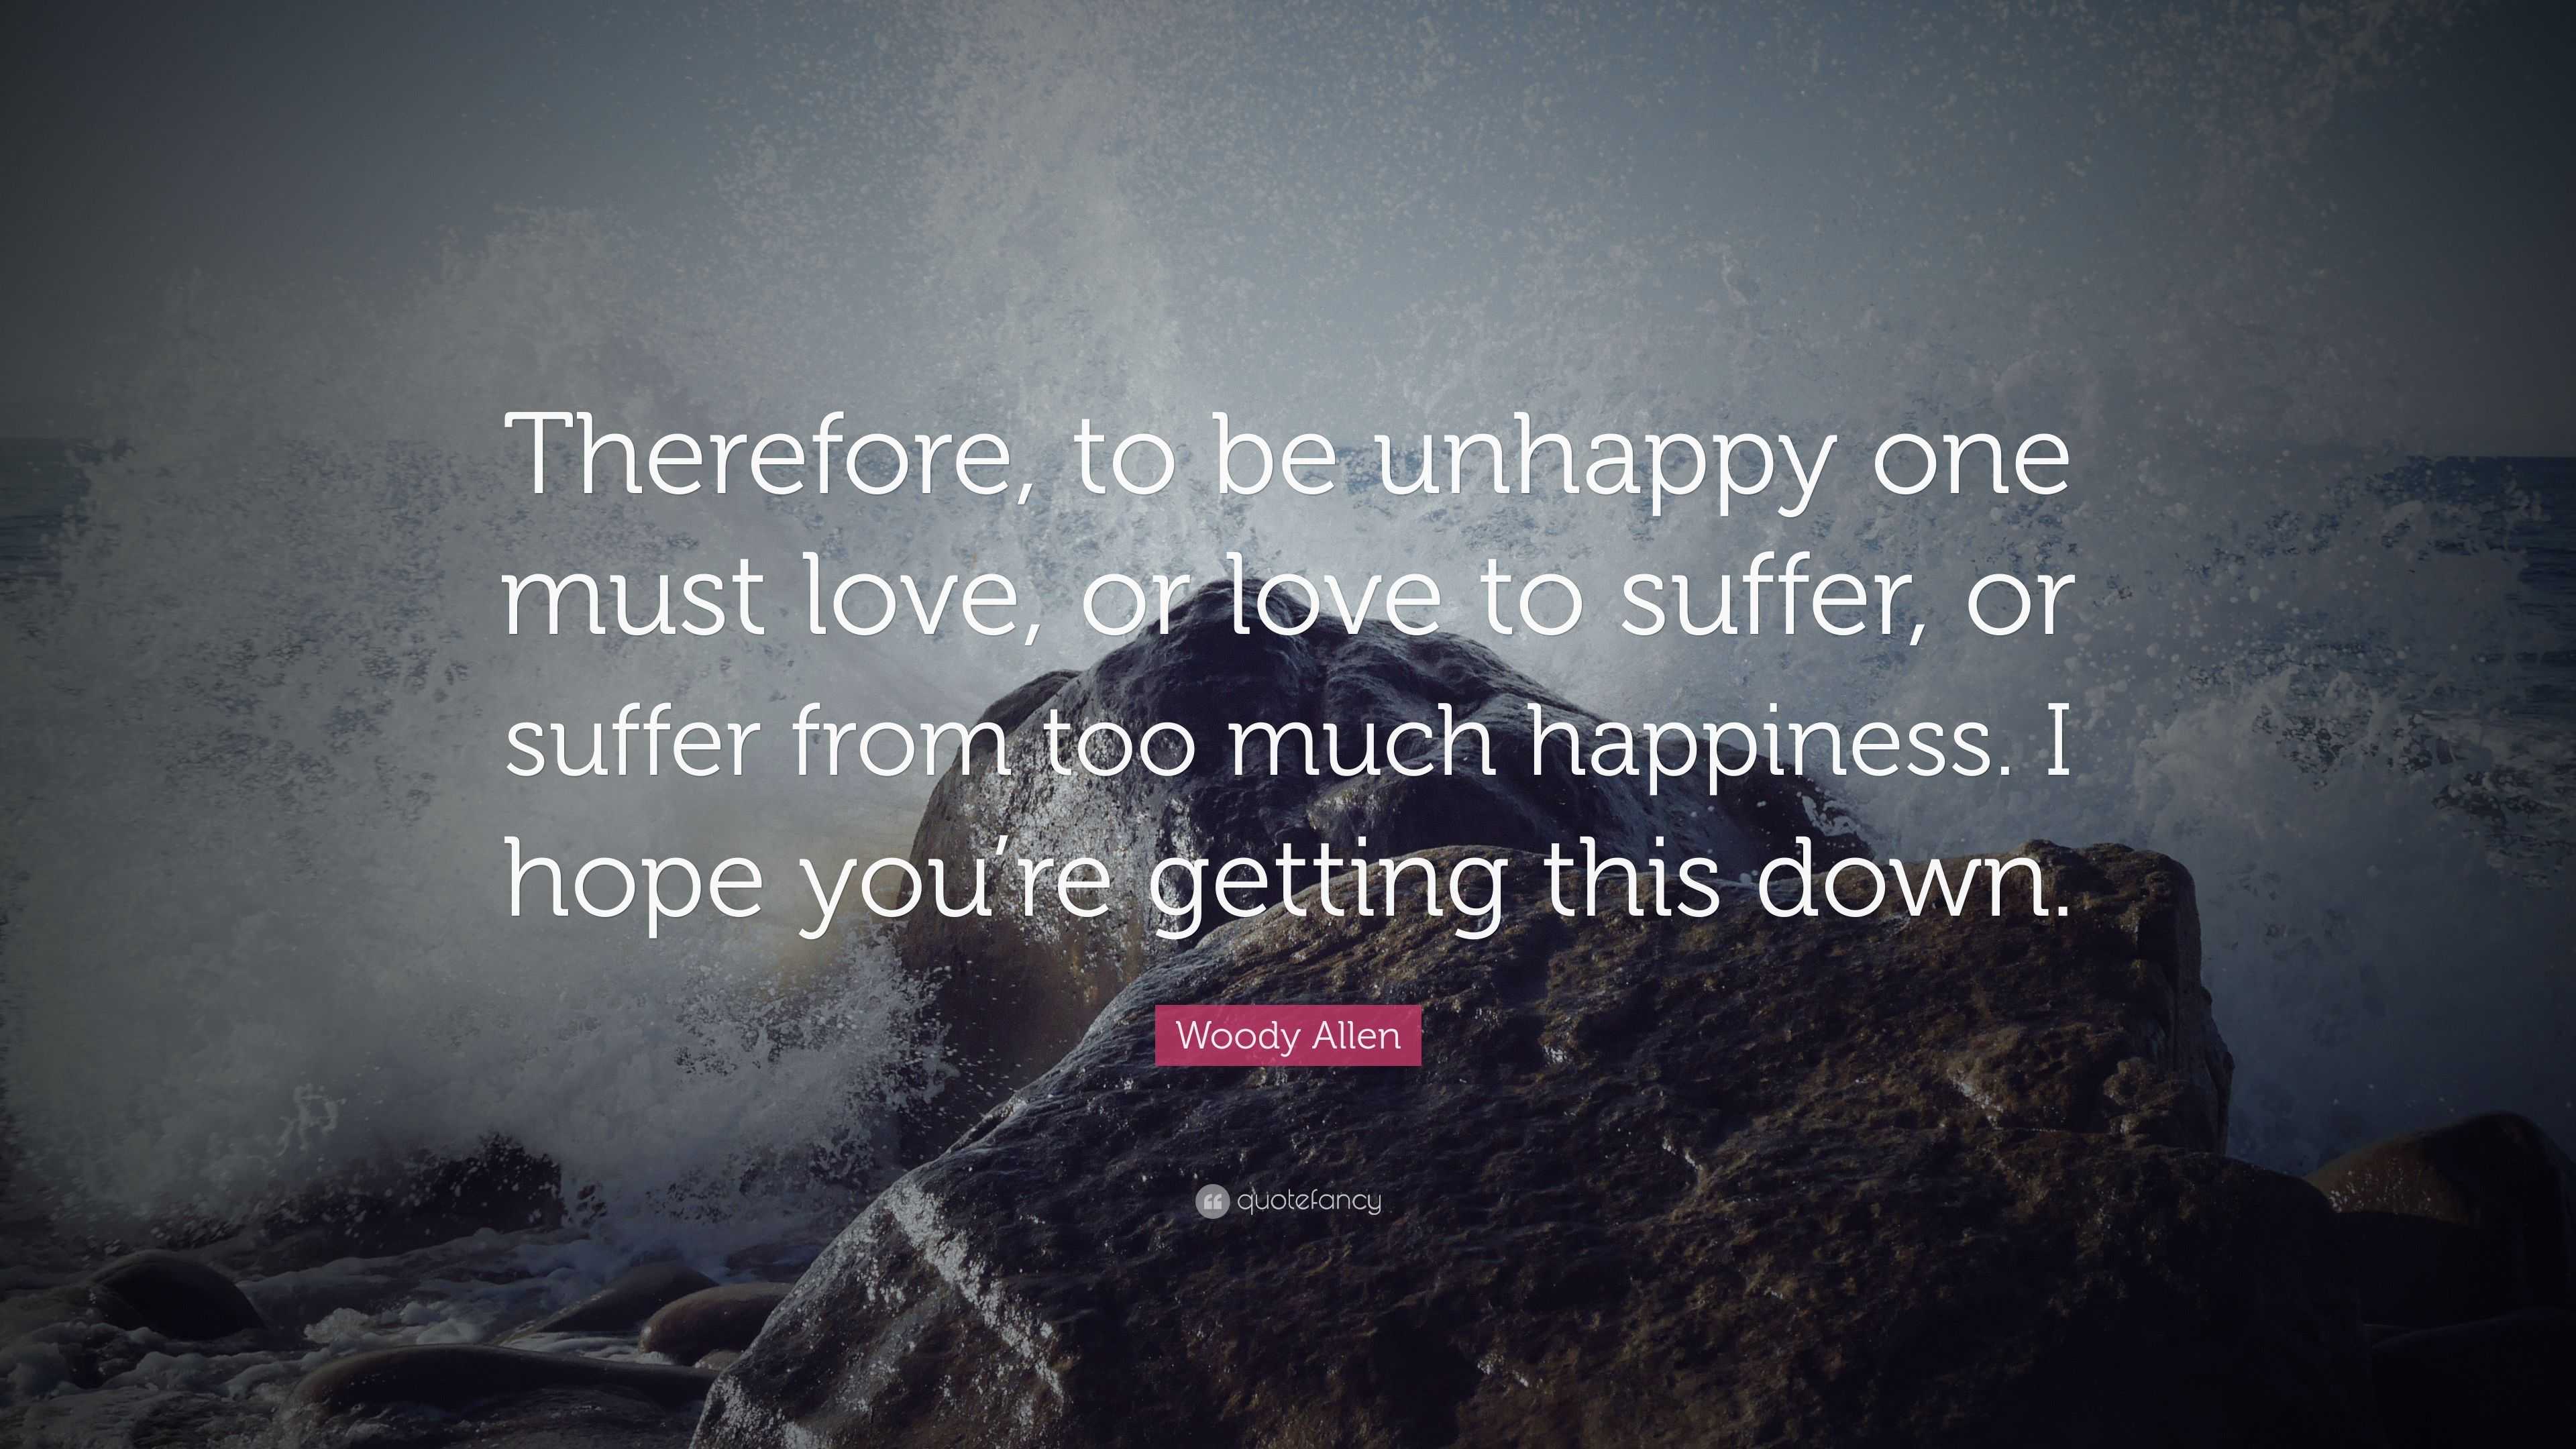 Woody Allen Quote: “Therefore, to be unhappy one must love, or love to ...